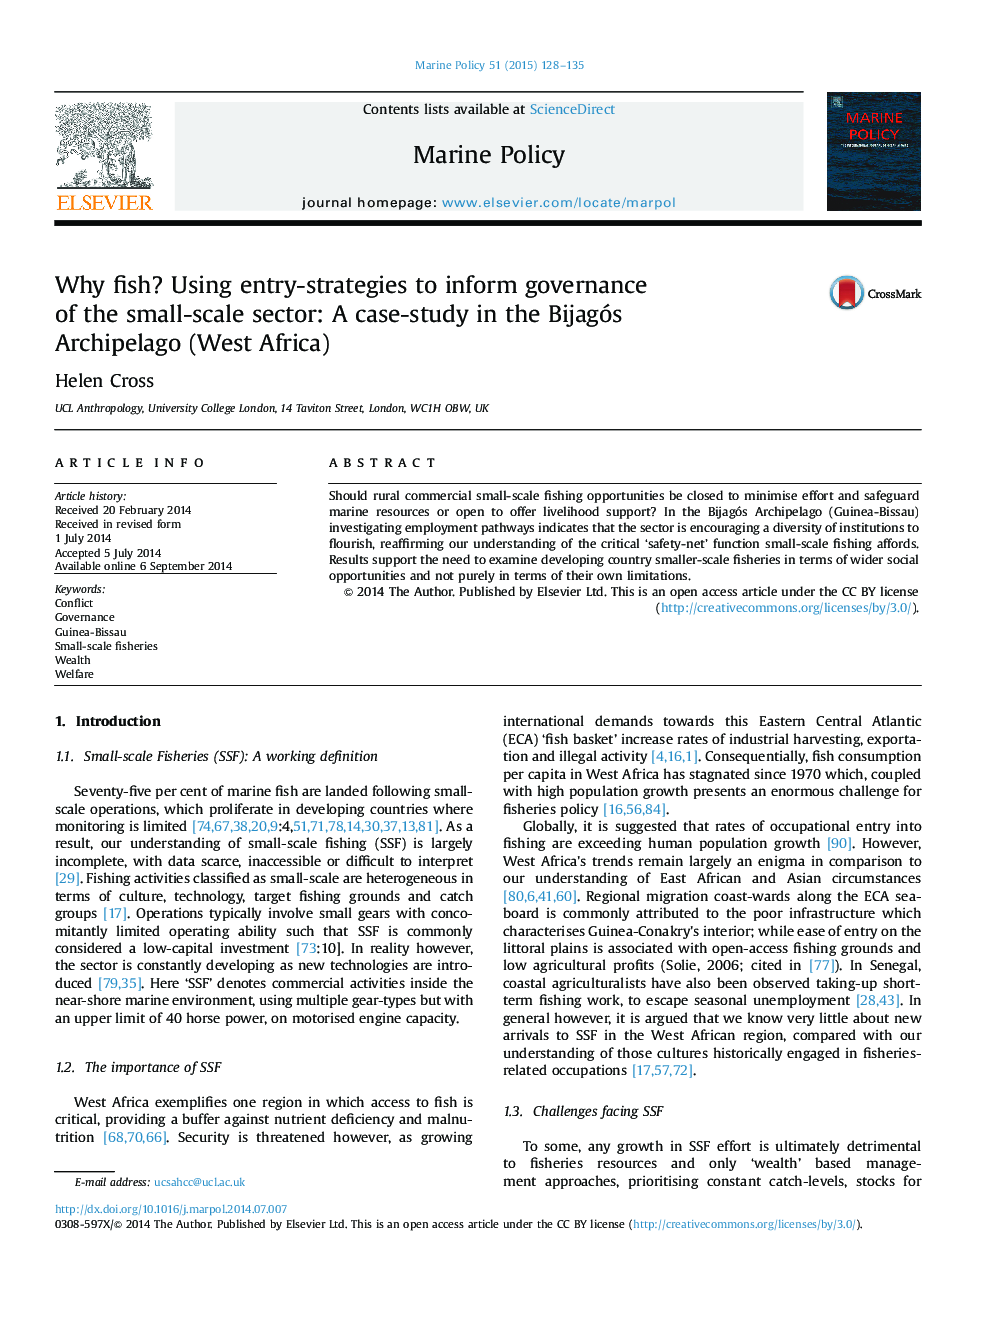 Why fish? Using entry-strategies to inform governance of the small-scale sector: A case-study in the Bijagós Archipelago (West Africa)